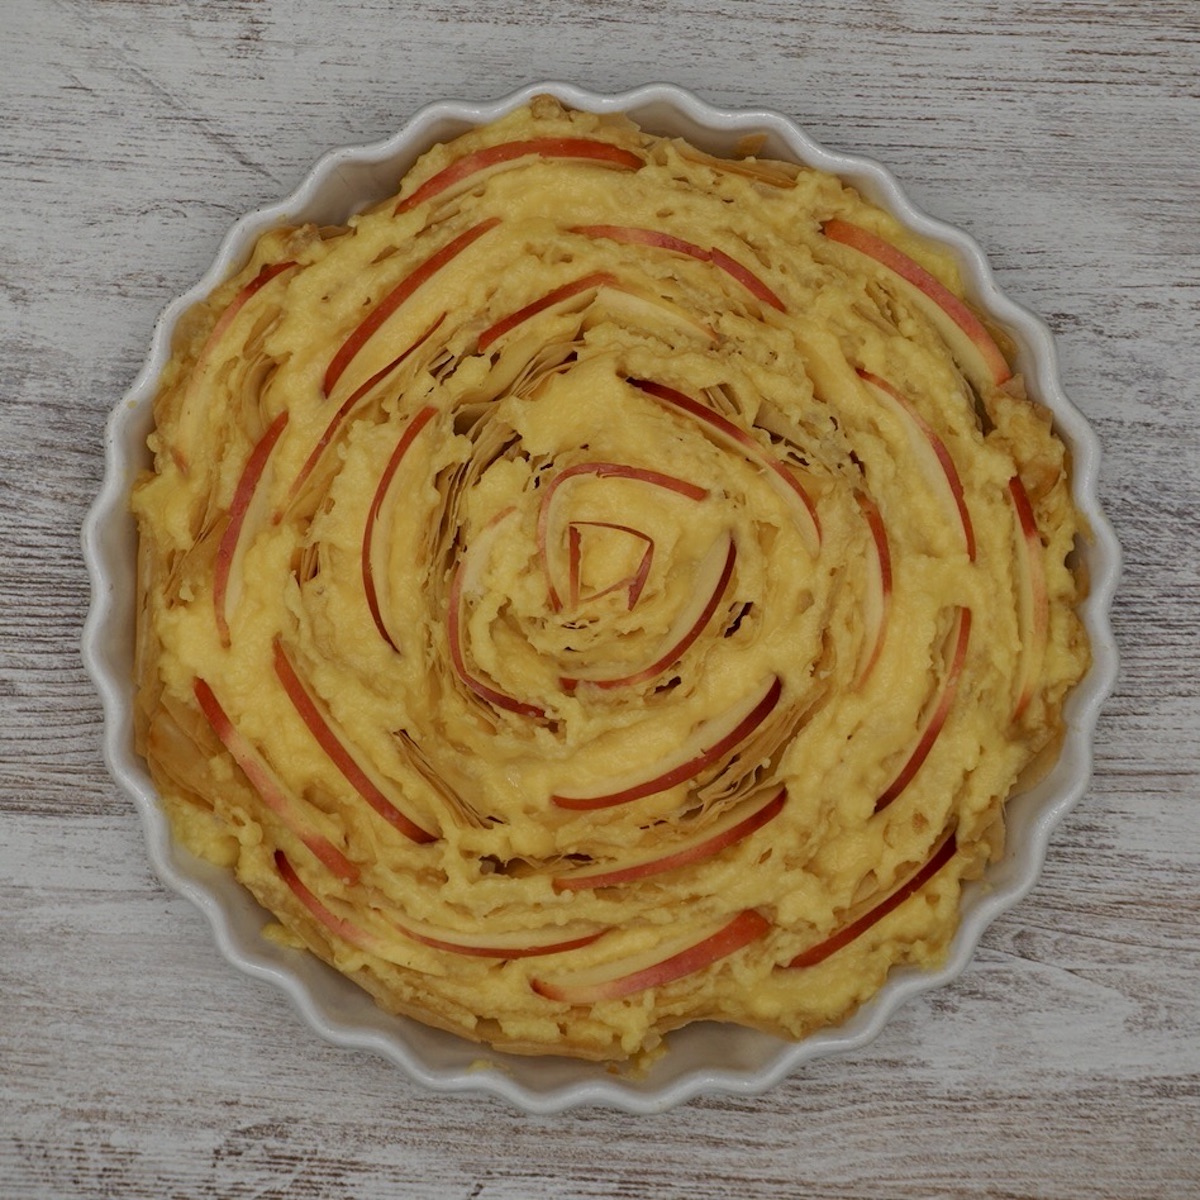 An unbaked apple custard tart made with filo pastry.